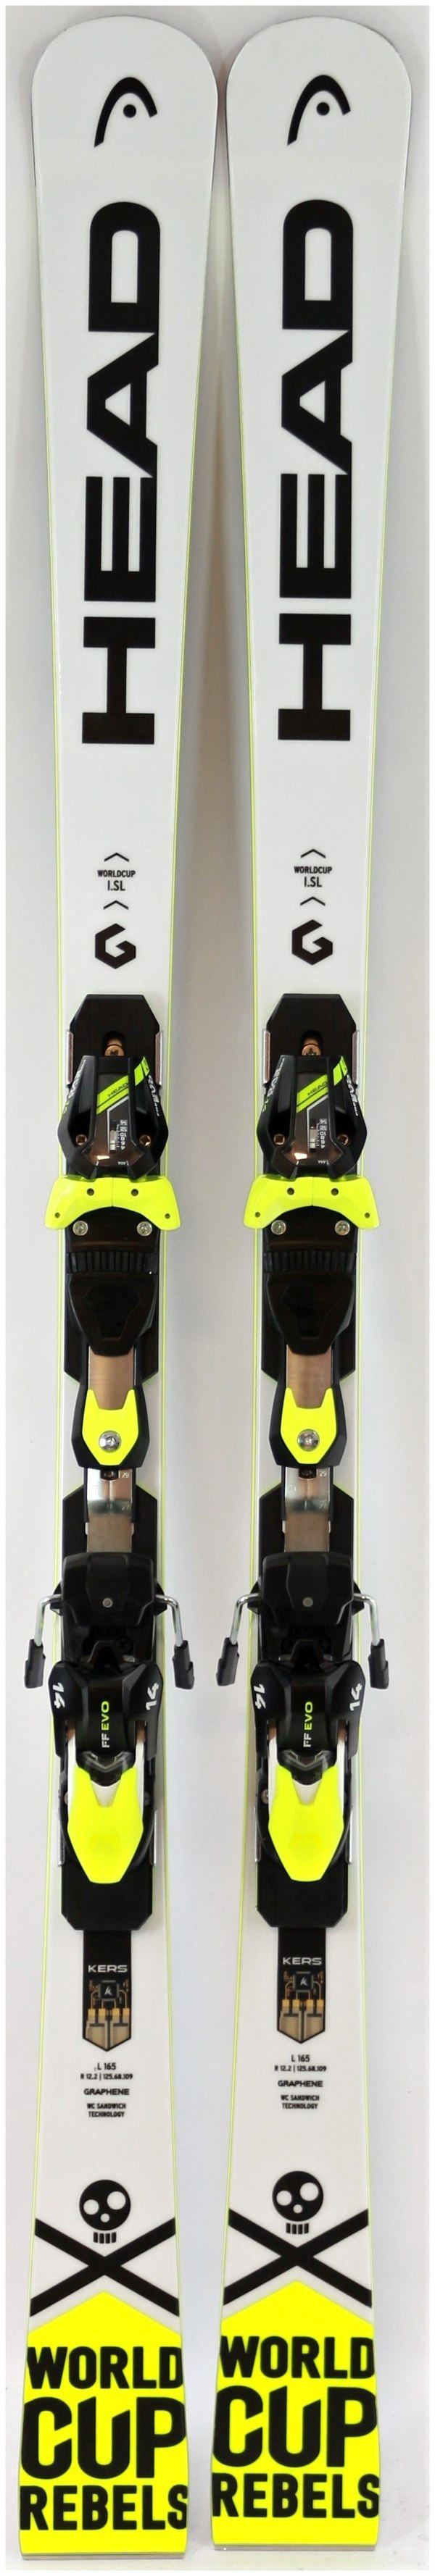 Slx Skis 165cm don't come with bindings Head World Cup Rebels I 